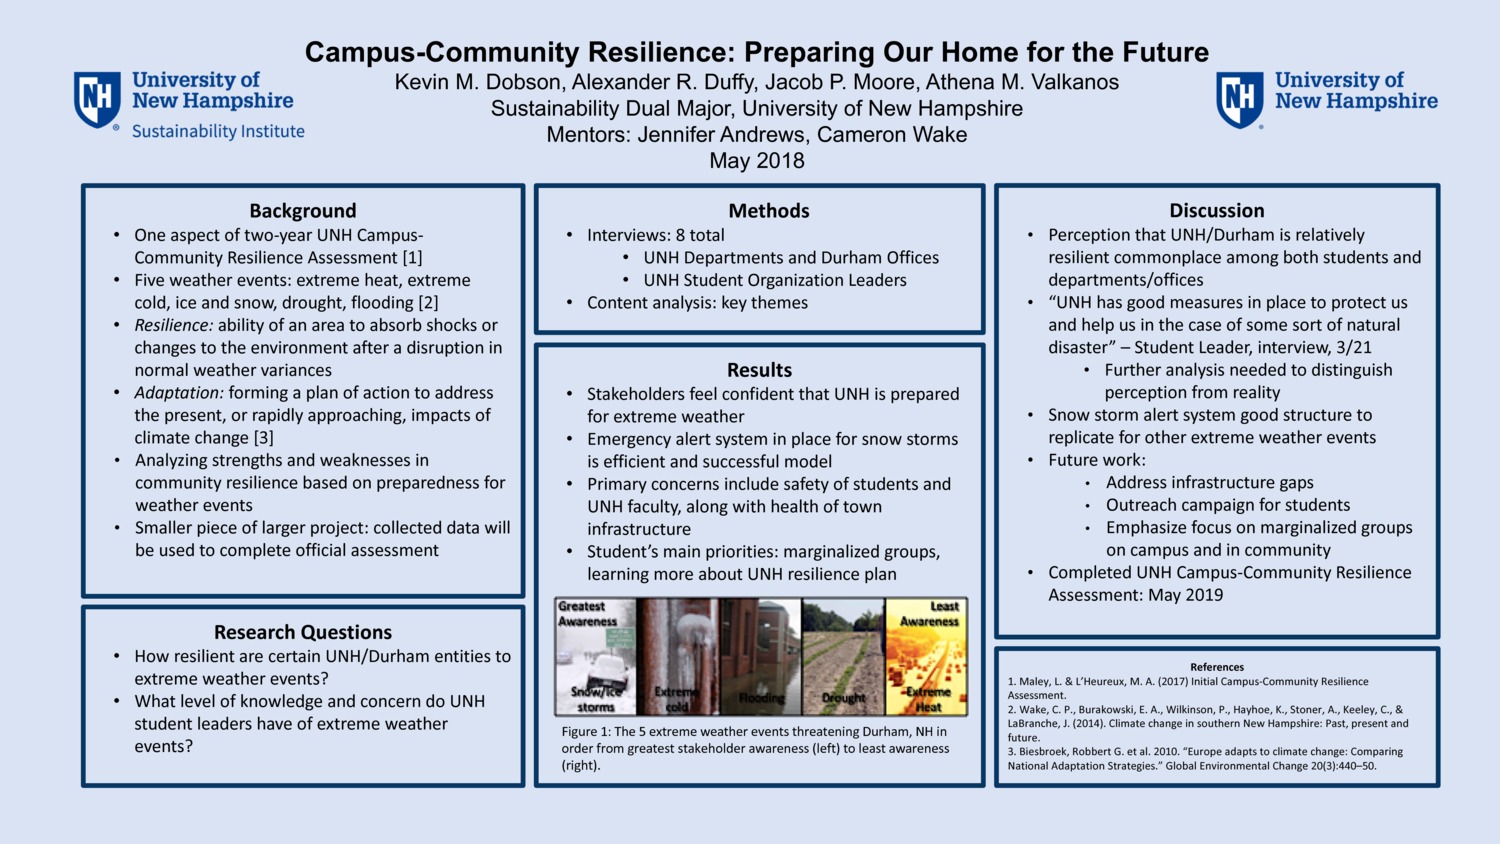 Campus-Community Resilience: Preparing Our Home For The Future by amv2000